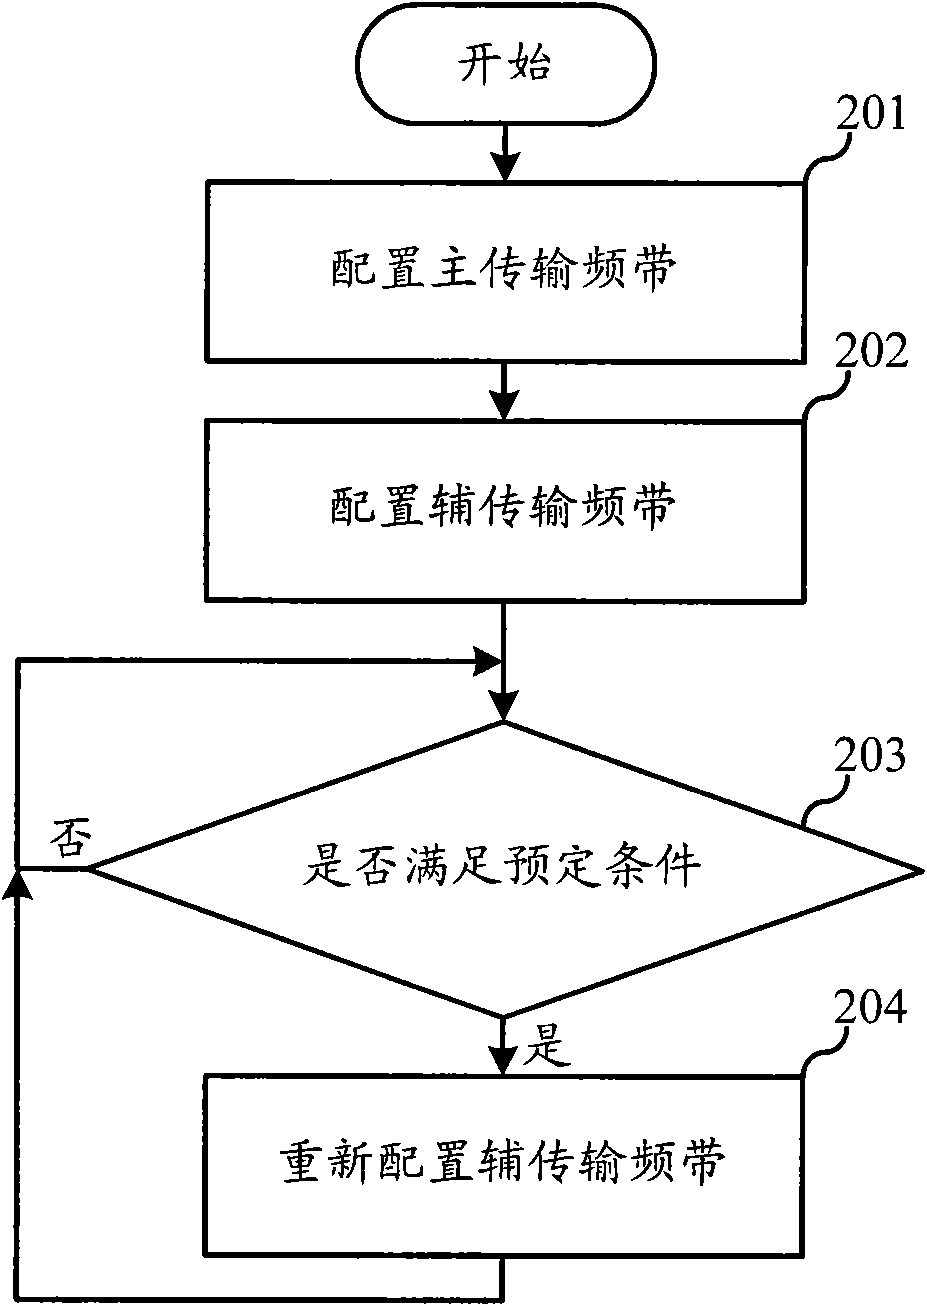 Method and device for collocating and selecting transmission frequency band